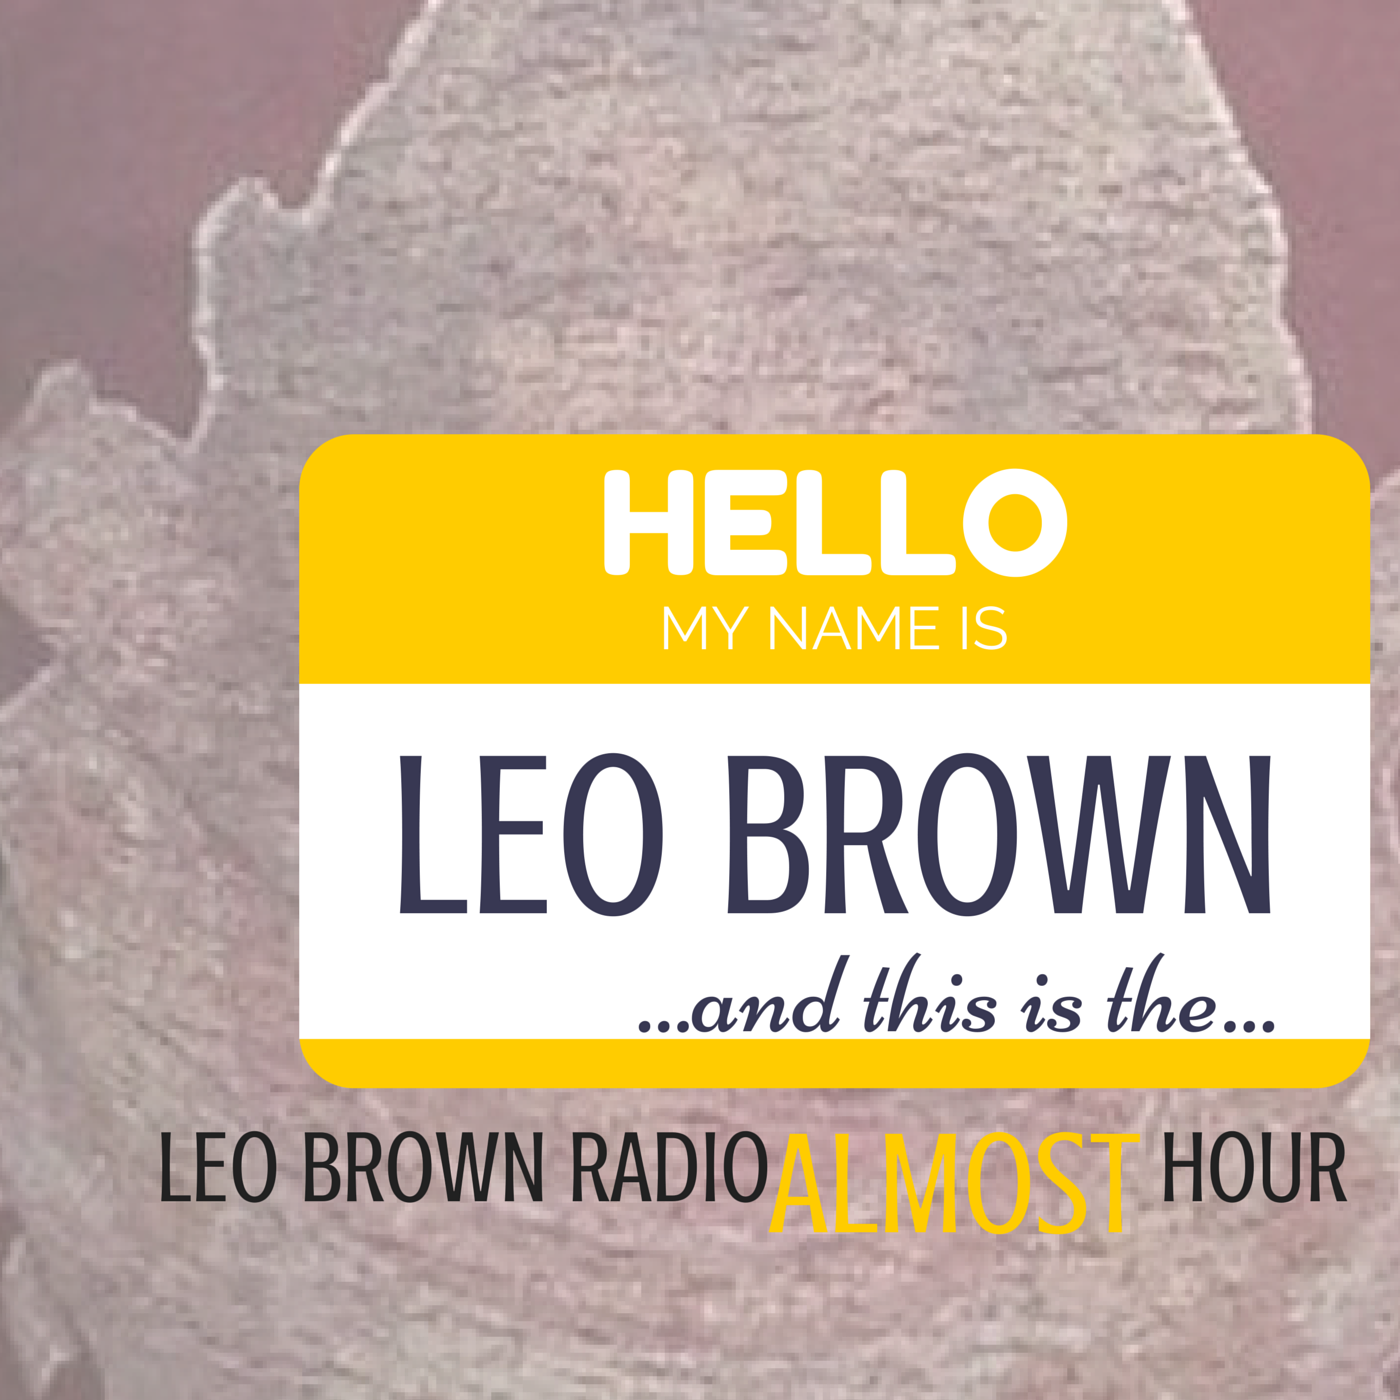 Leo Brown Almost Hour 03/09/17